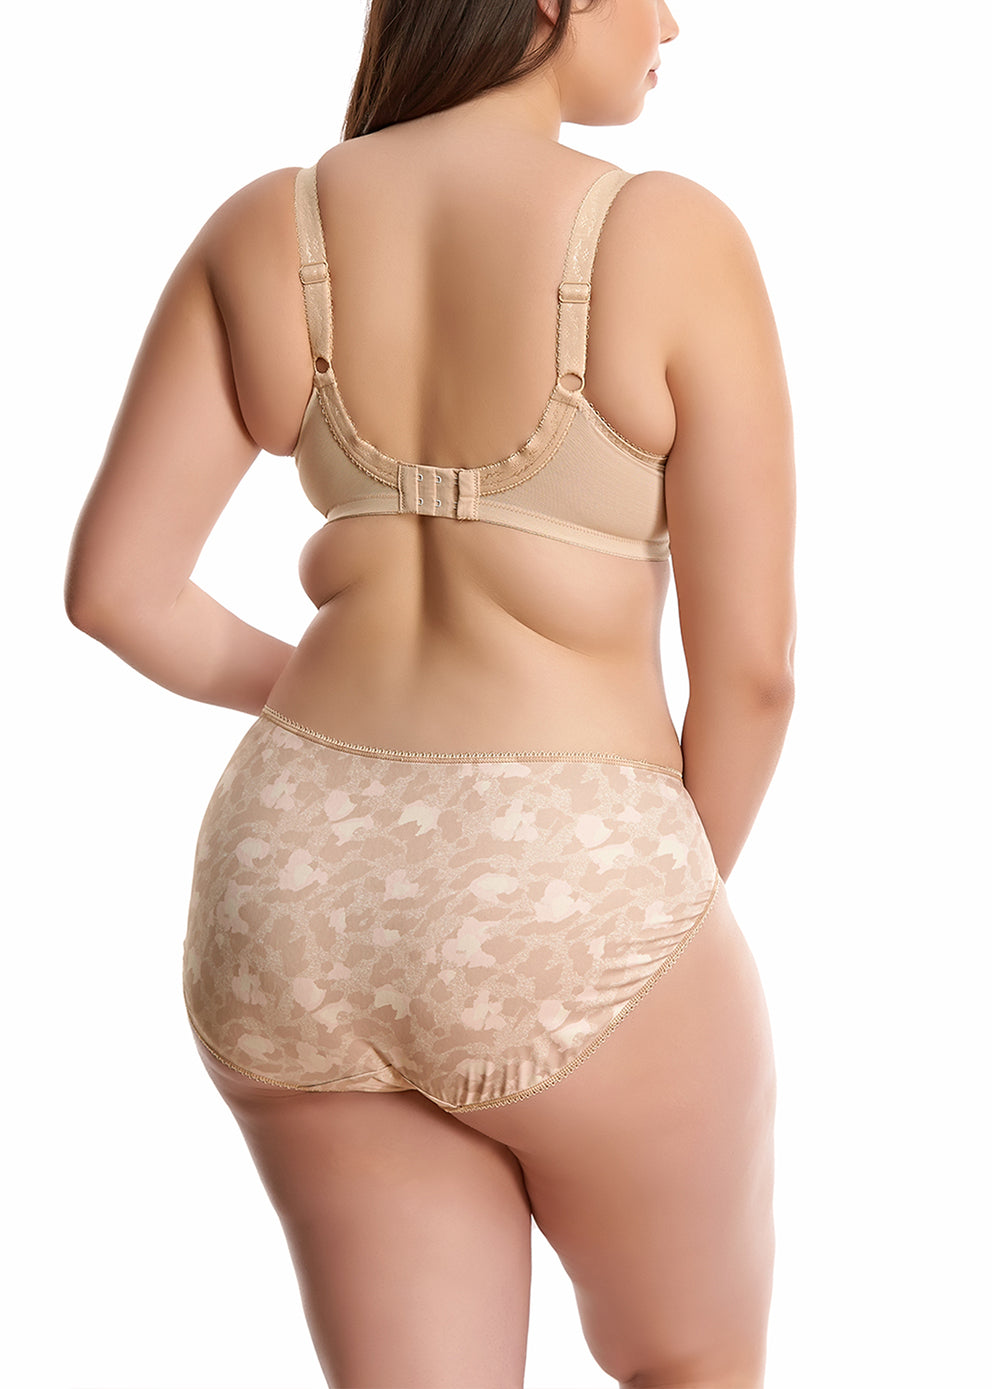 Catherines Smooth Underwire Full Coverage Toasted Almond Bra Size 52DD